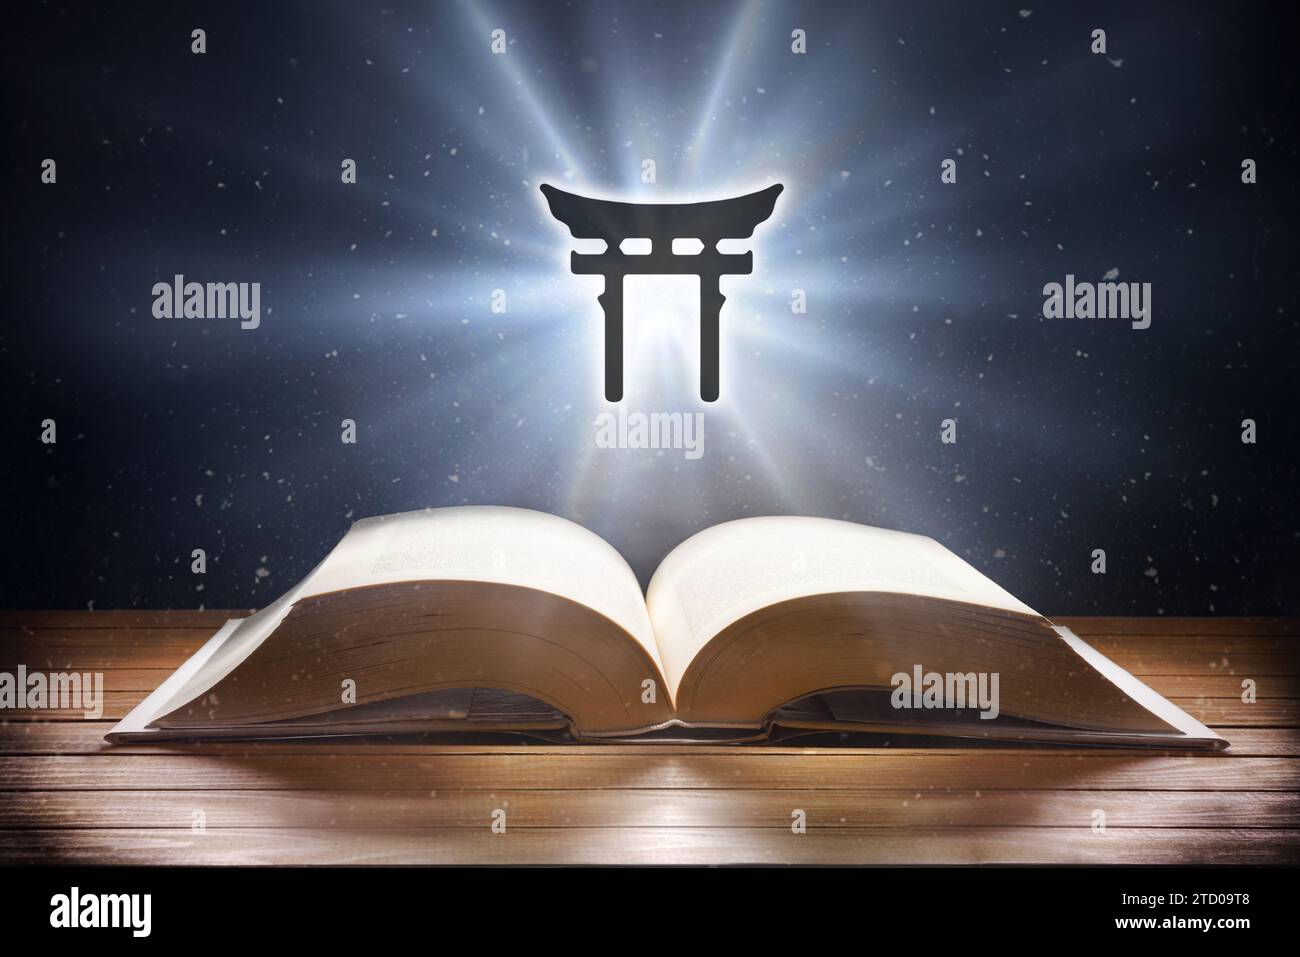 Open book on wooden table and shintoism symbol with beam of light with dark background. Front view. Stock Photo